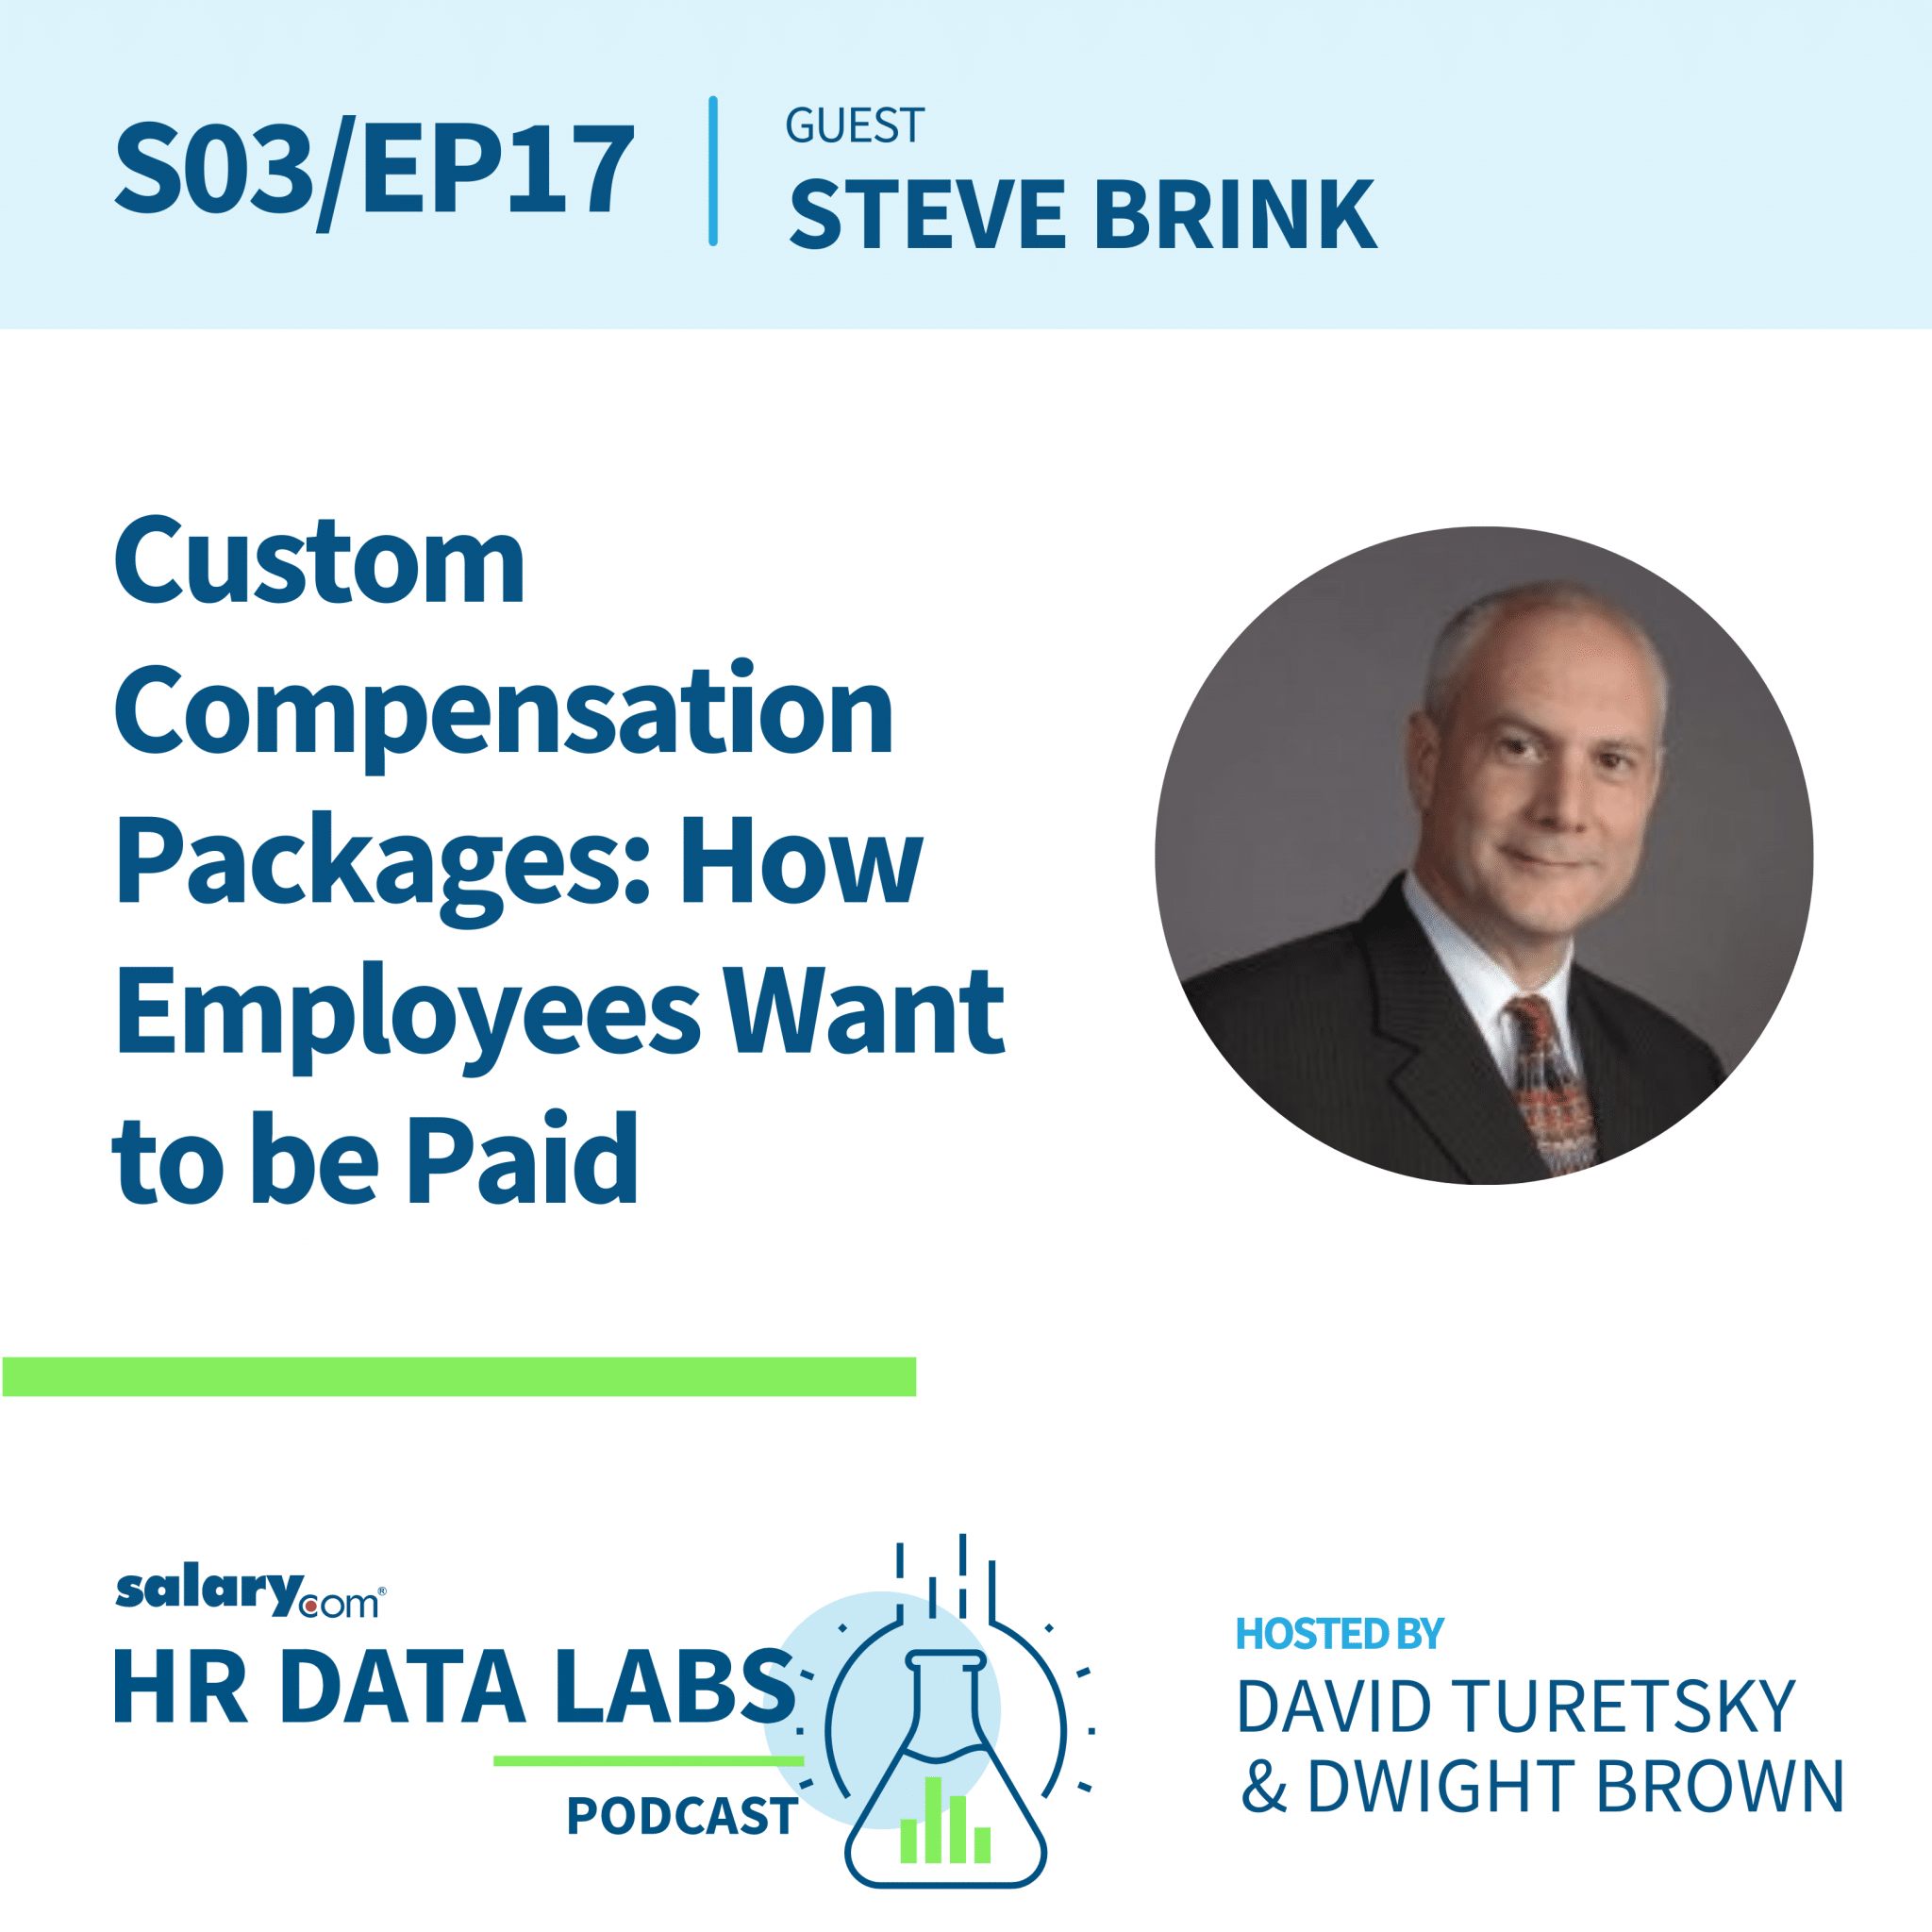 Steve Brink - Custom Compensation Packages: How Employees Want to be Paid